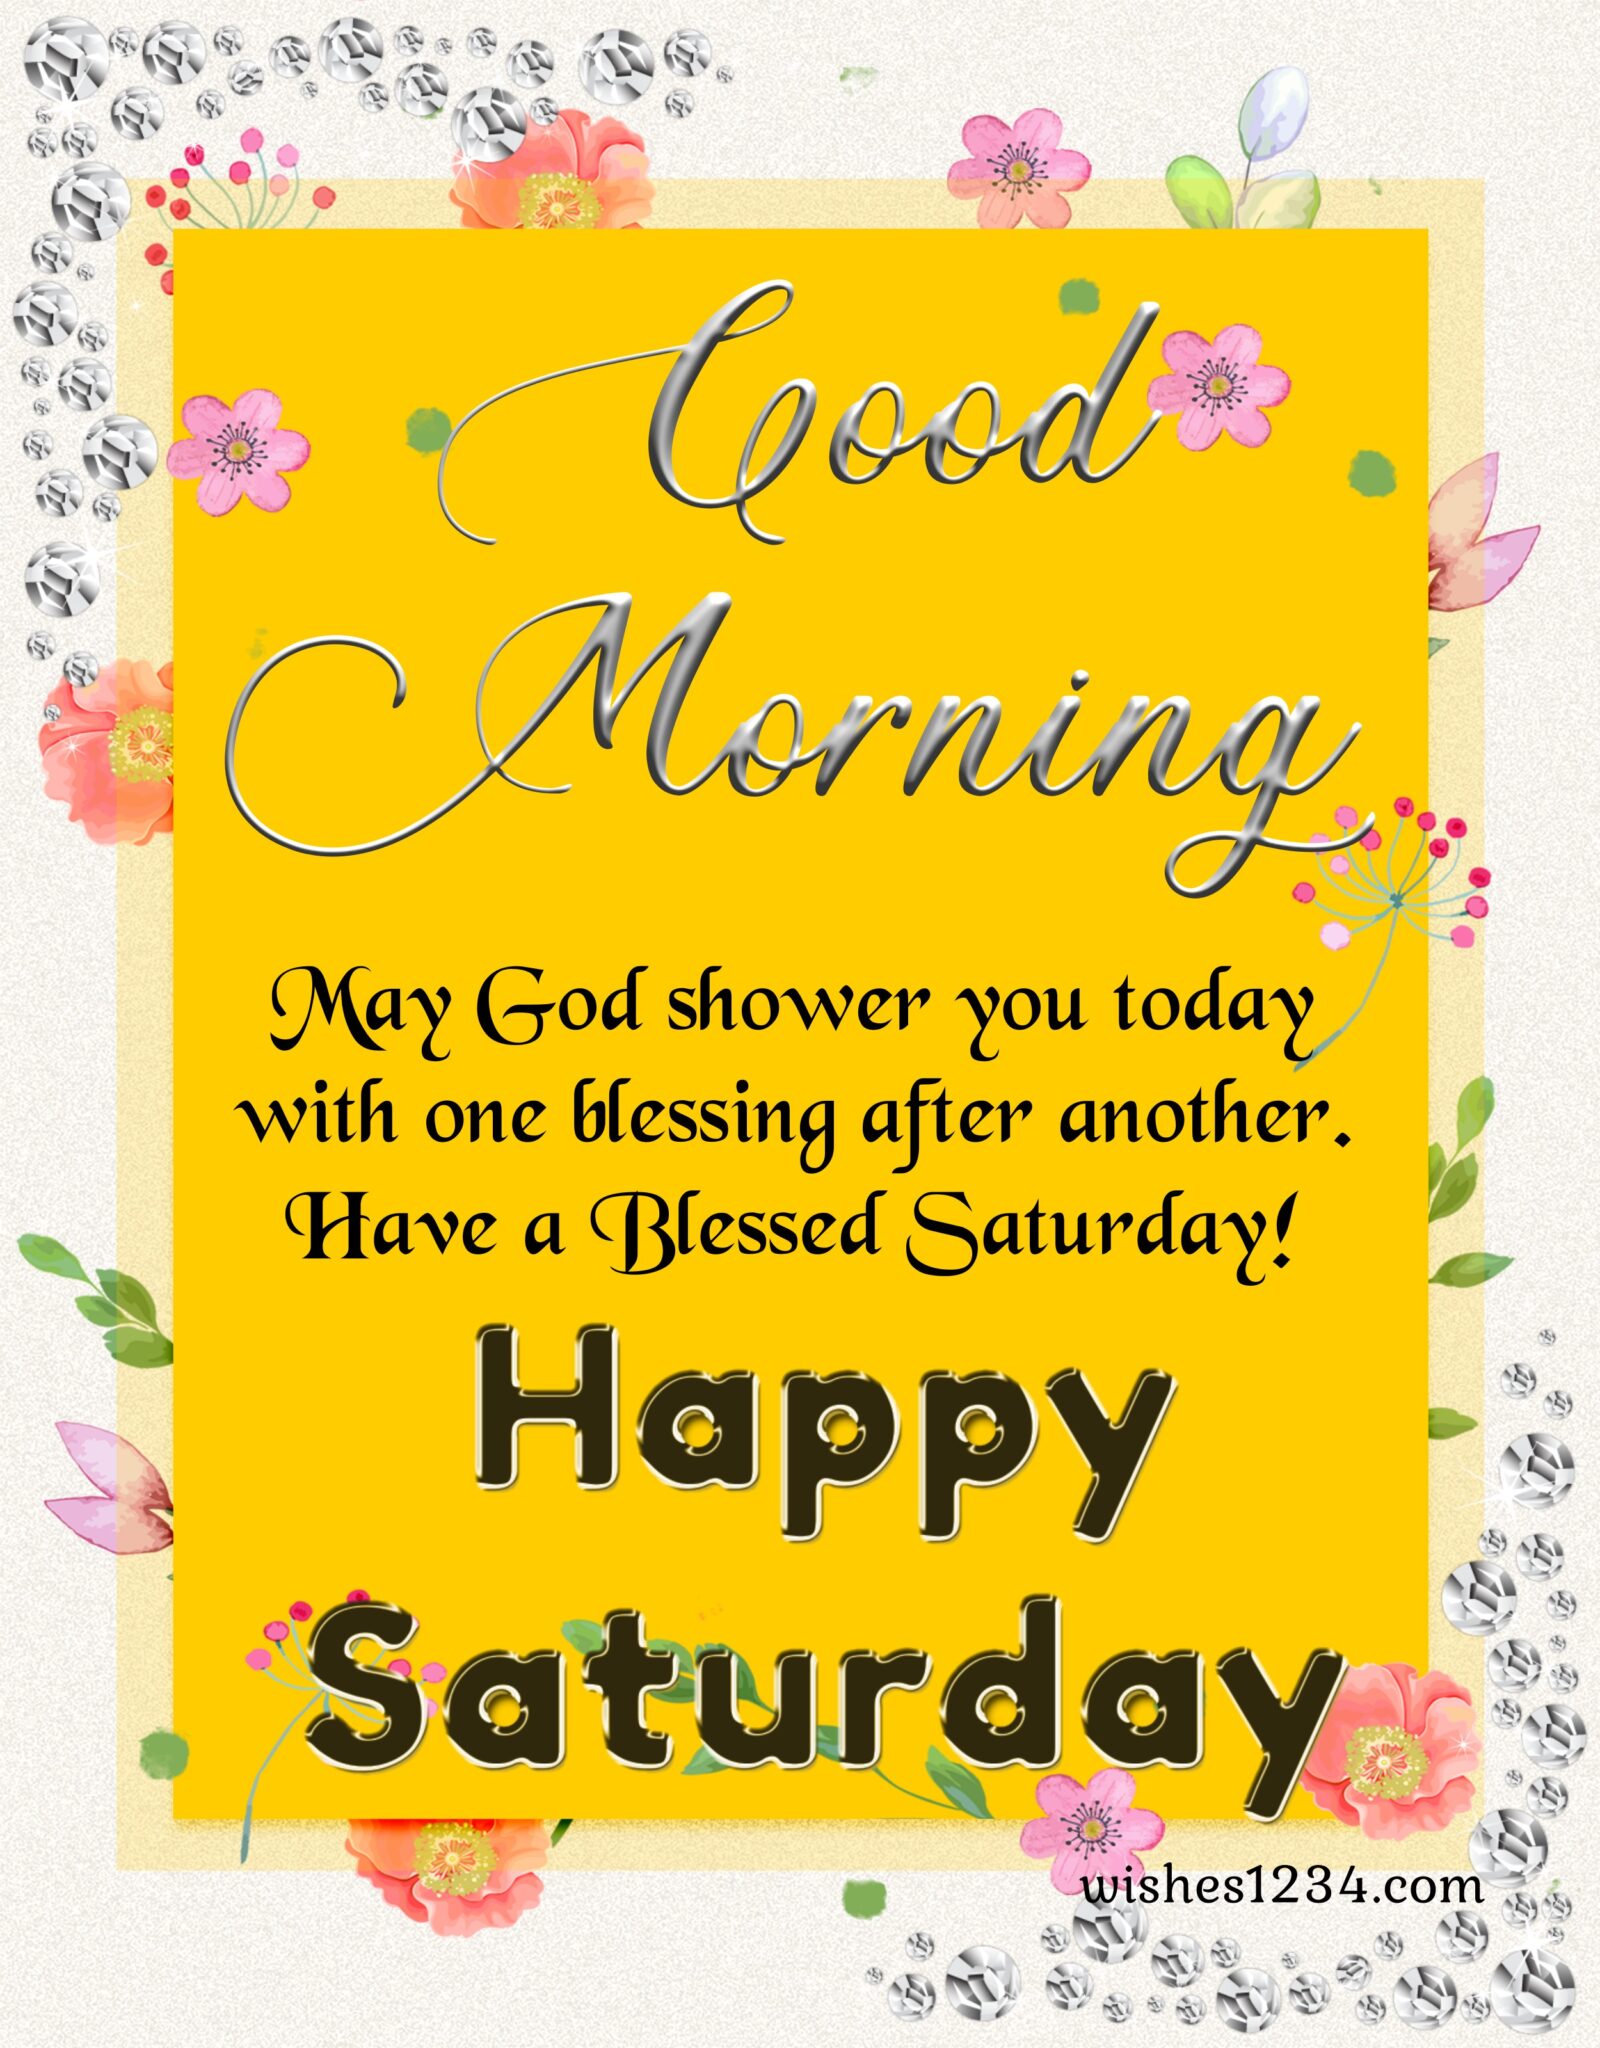 Good Morning Saturday Wishes and Blessings with Images